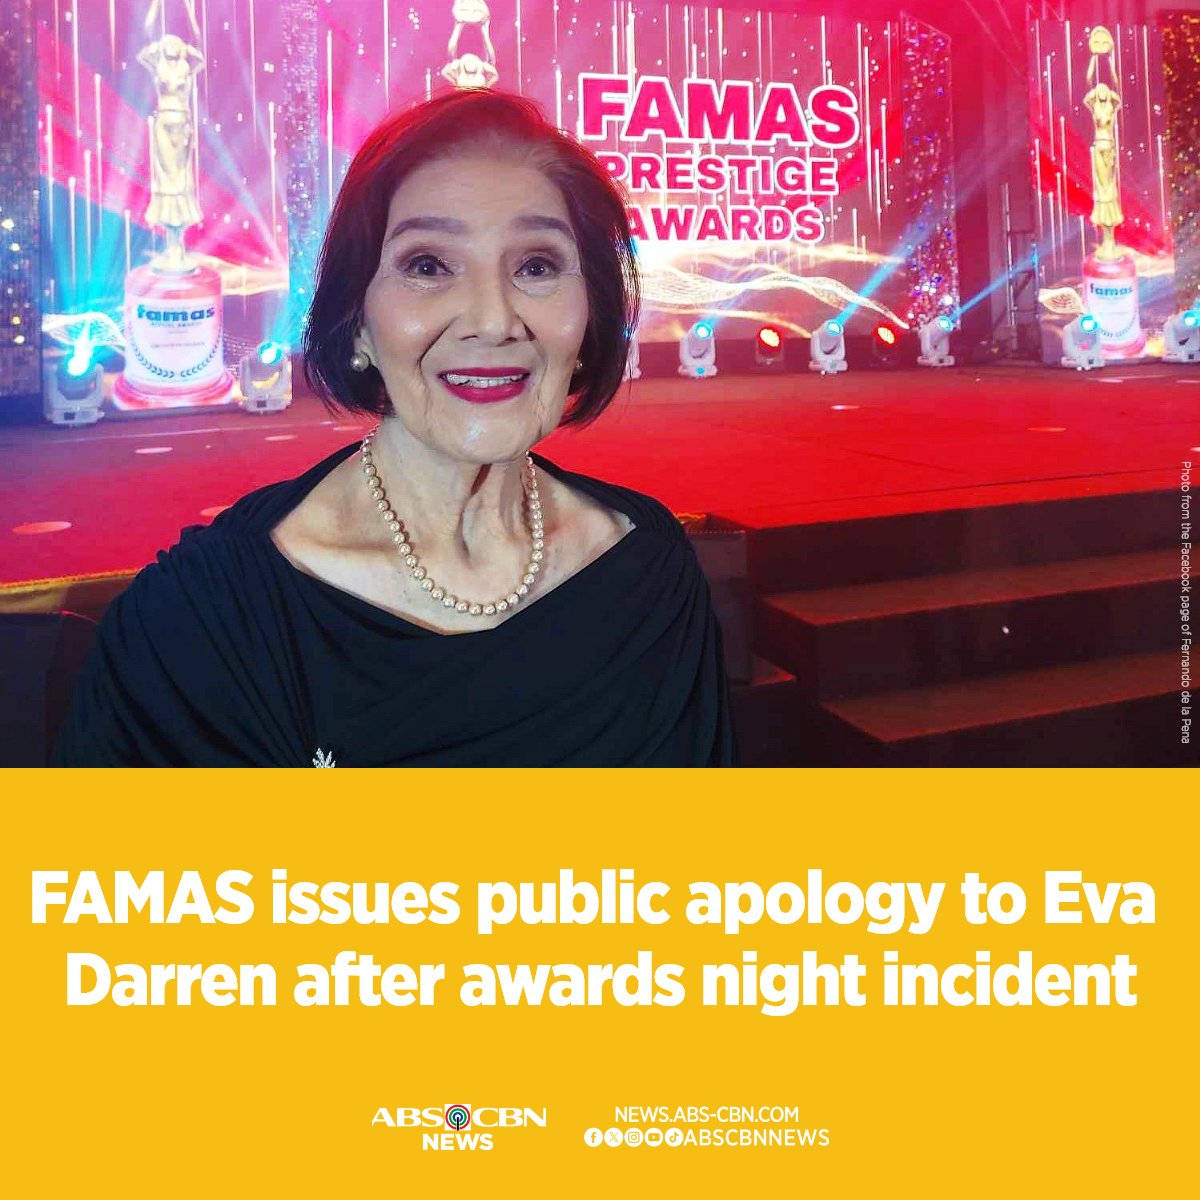 FAMAS issued a public apology to veteran actress Eva Darren. Darren was invited to present an award for this year's ceremony but she was never called on stage. The award-giving body claimed that the incident was an unintentional oversight due to the production team being unable